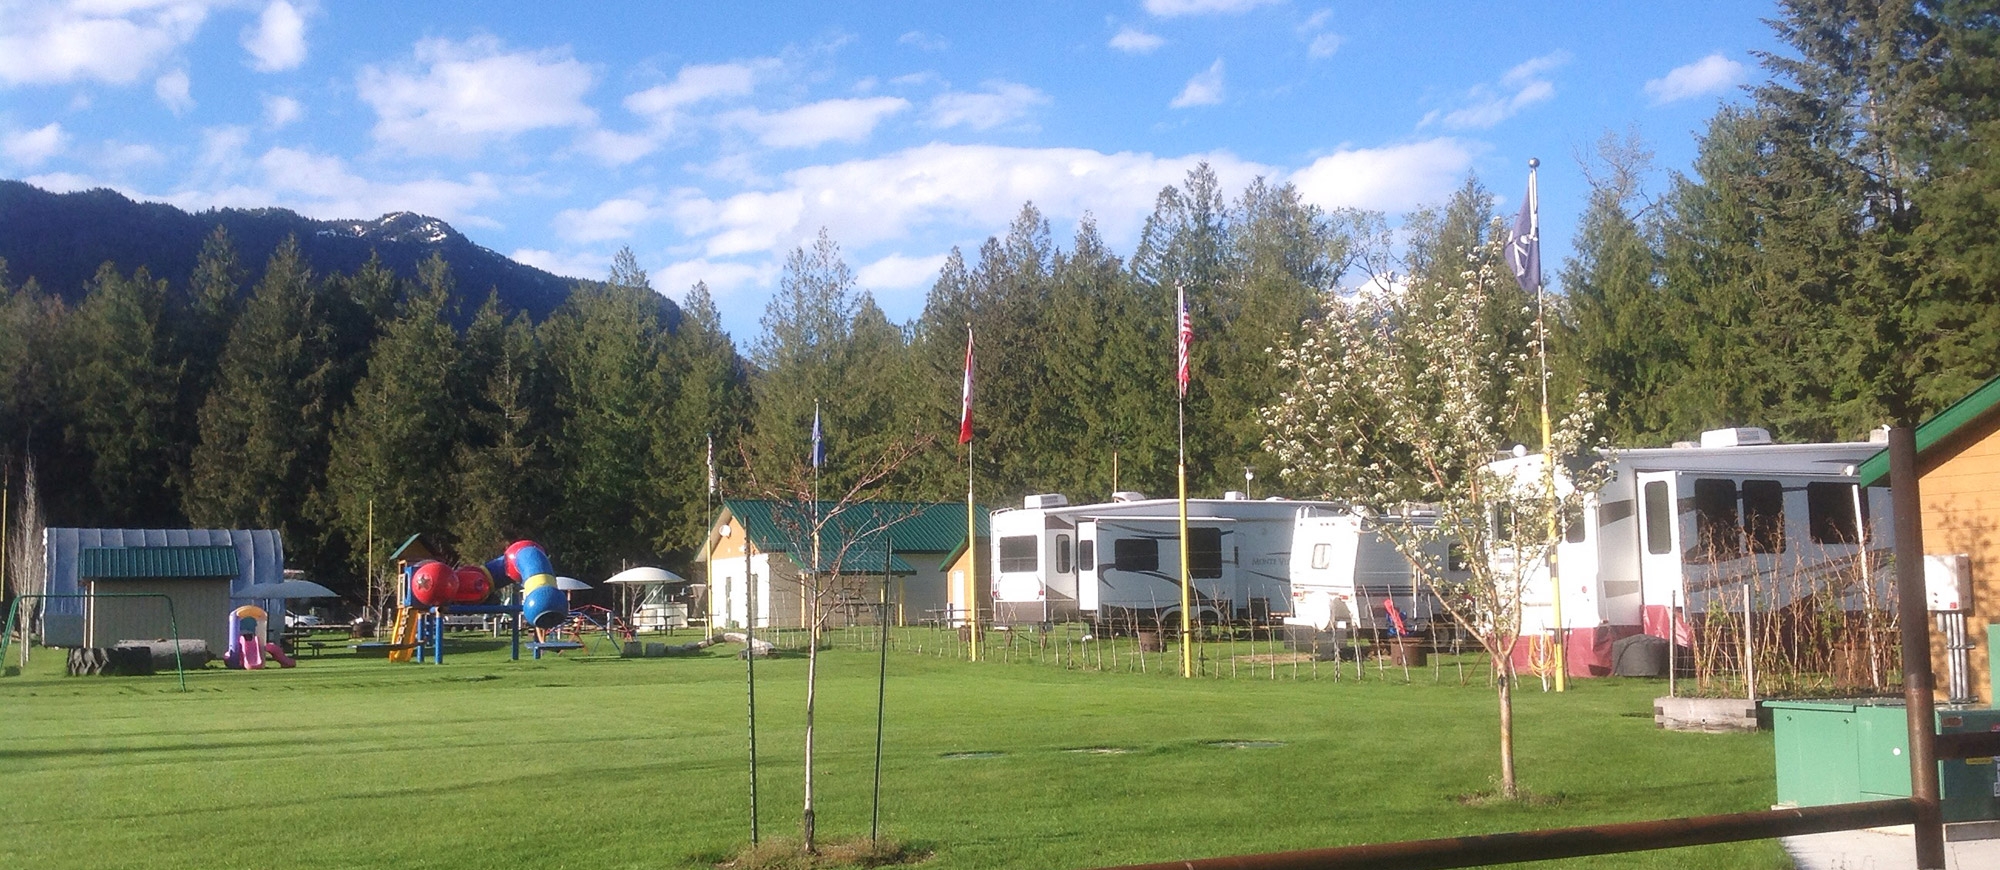 Crawford Bay RV Park with several RVs and playground in view